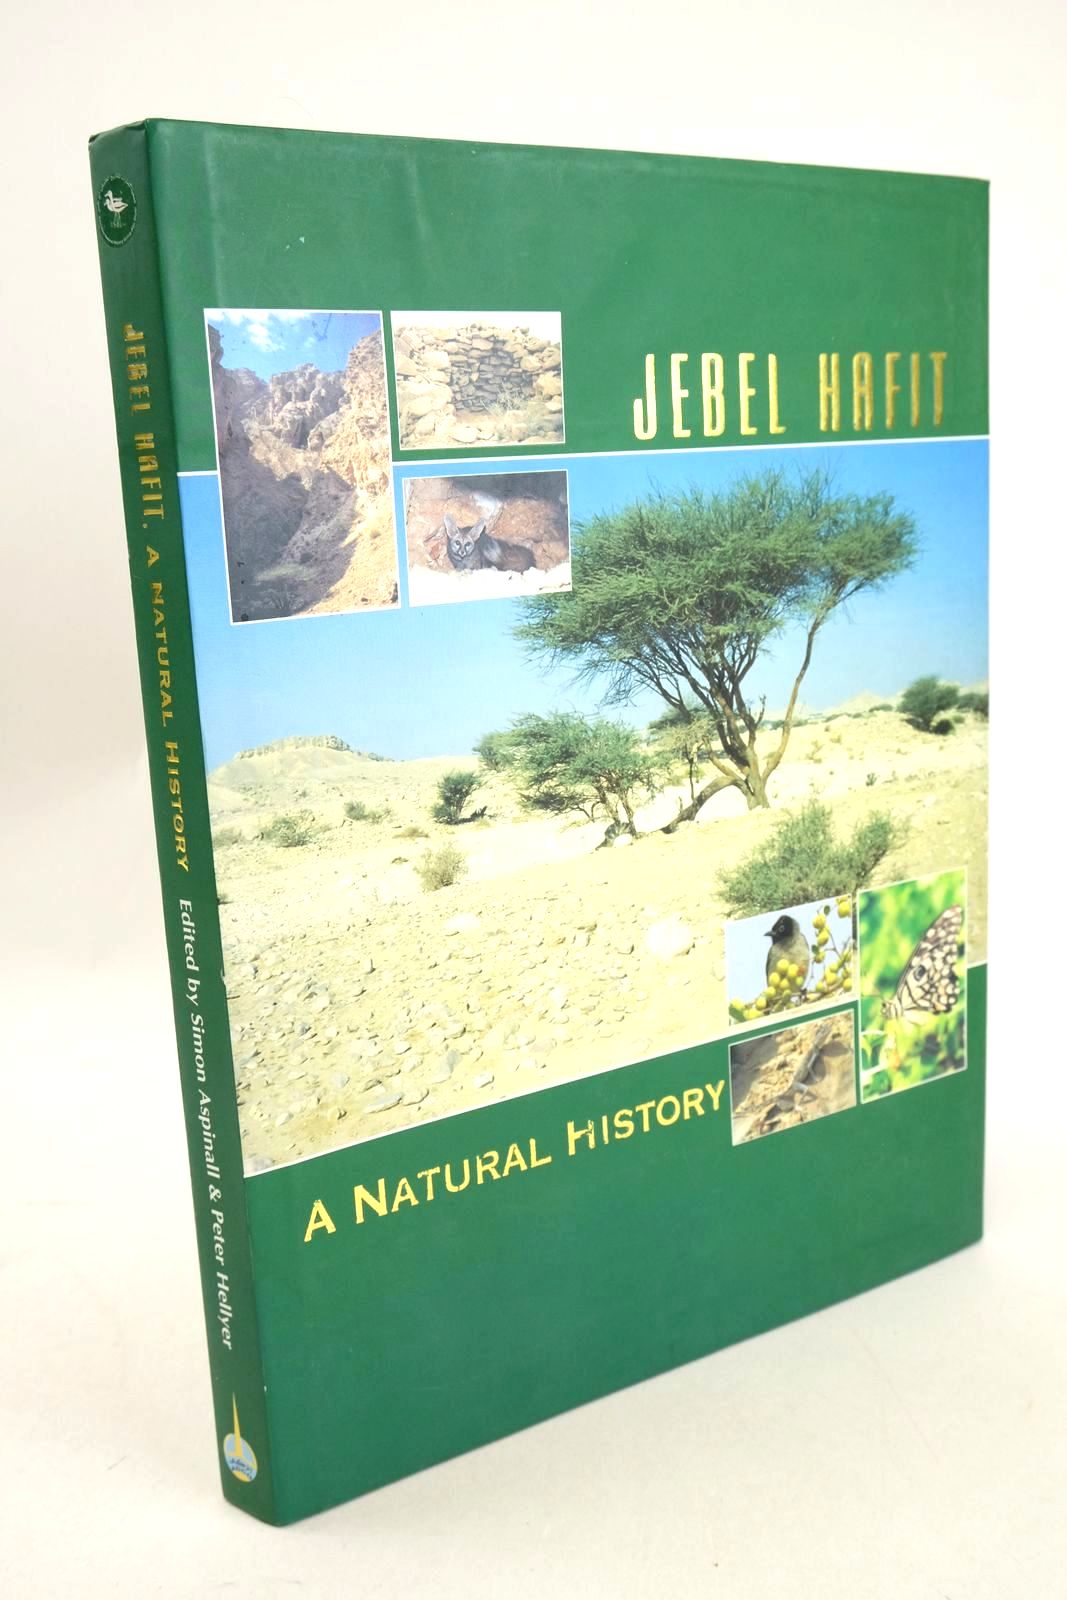 Photo of JEBEL HAFIT, A NATURAL HISTORY written by Aspinall, Simon Hellyer, Peter published by Emirates Natural History Group (STOCK CODE: 1327625)  for sale by Stella & Rose's Books